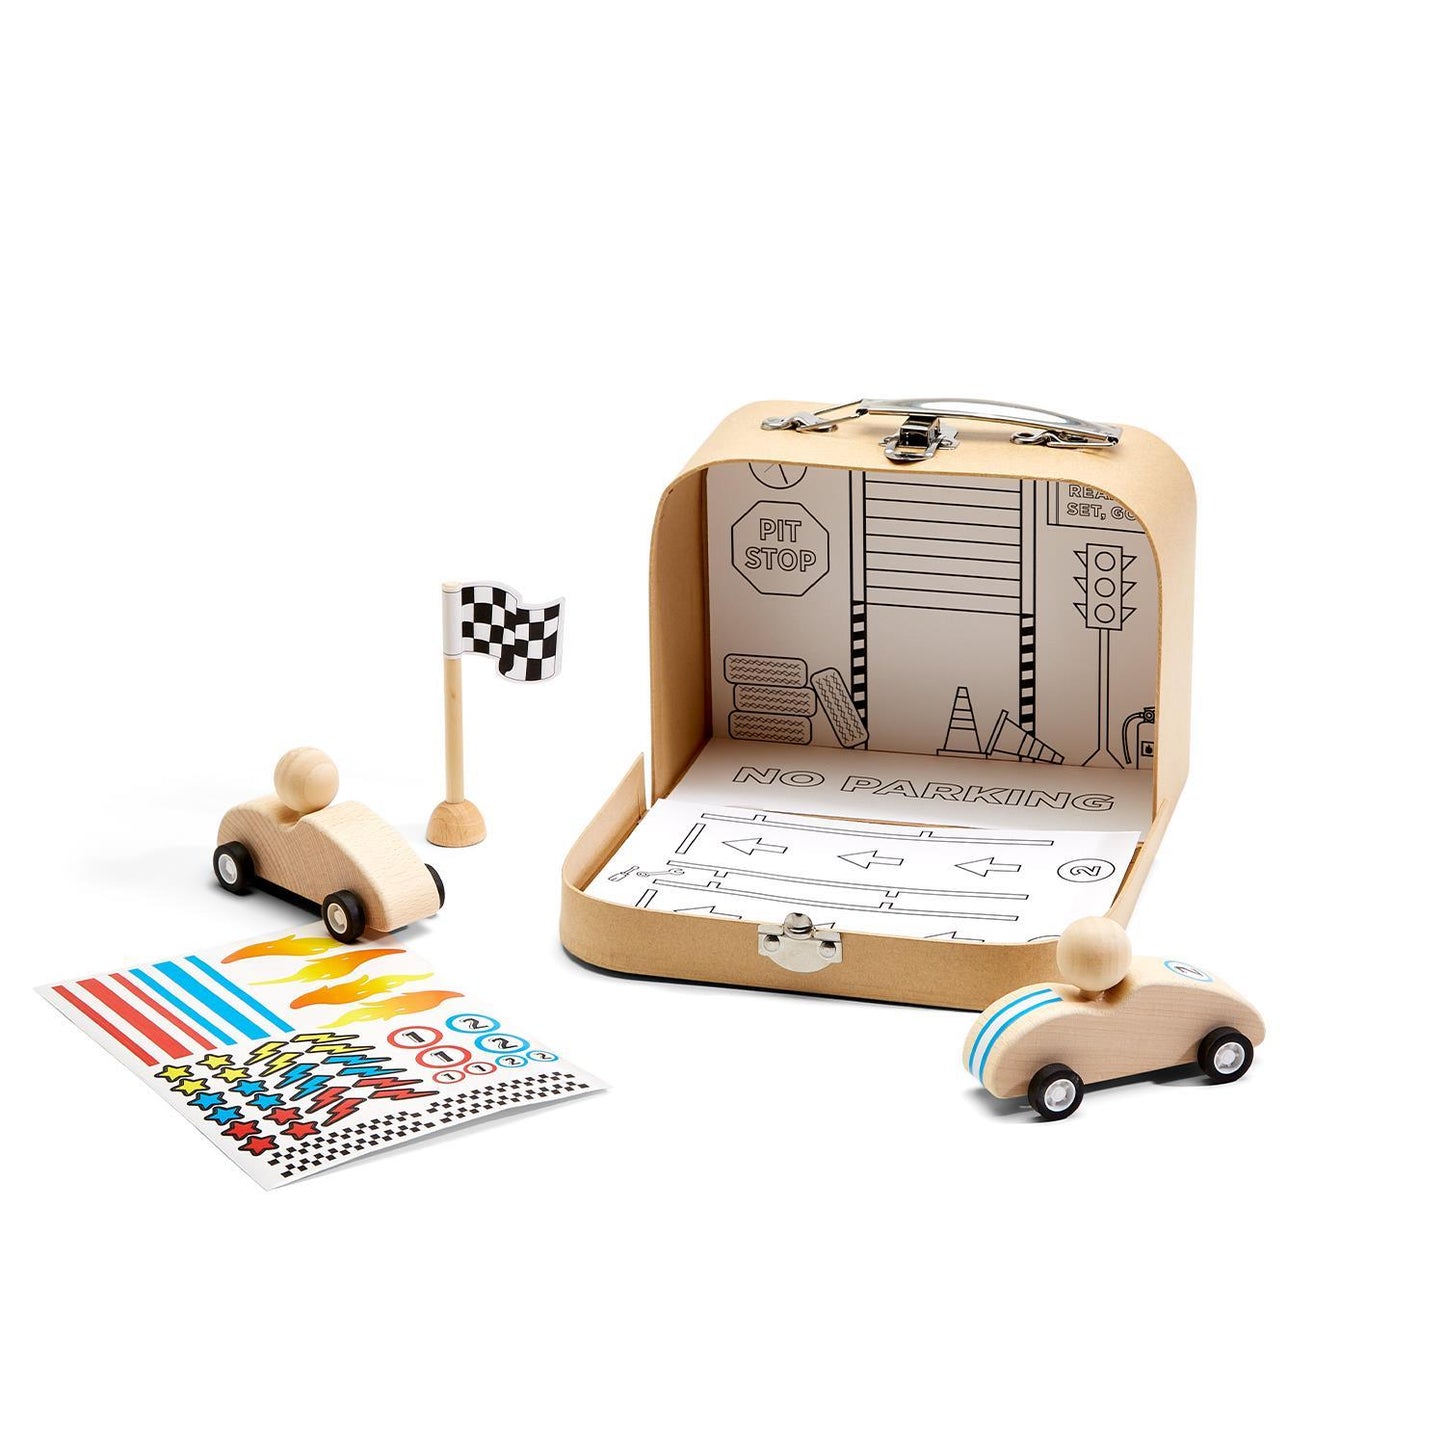 Two's Company Make Your Own Car Race Kit